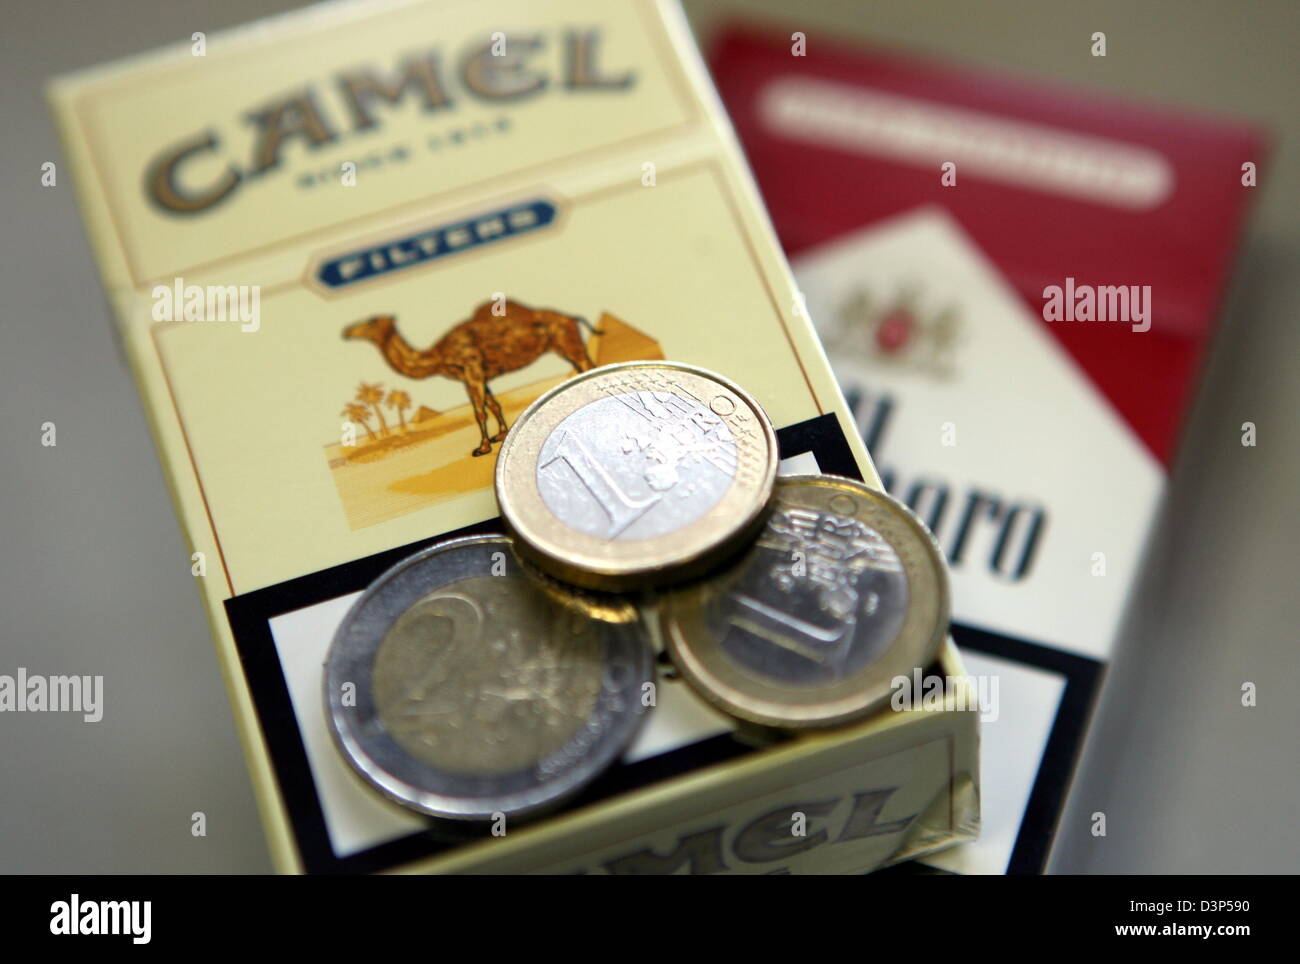 Four euros lie on top of two cigarette packets at a tobacco store in Hamburg, Germany, Wednesday 06 September 2006. Spokespersons of major tabacco companies in both Munich and Hamburg announced that smokers will pay an additional 20 cents per packet for most brands from 01 October due to a value added tax raise. A 'Marlboro' pack, with 17 cigarettes, will cost four euros. Photo: Ka Stock Photo